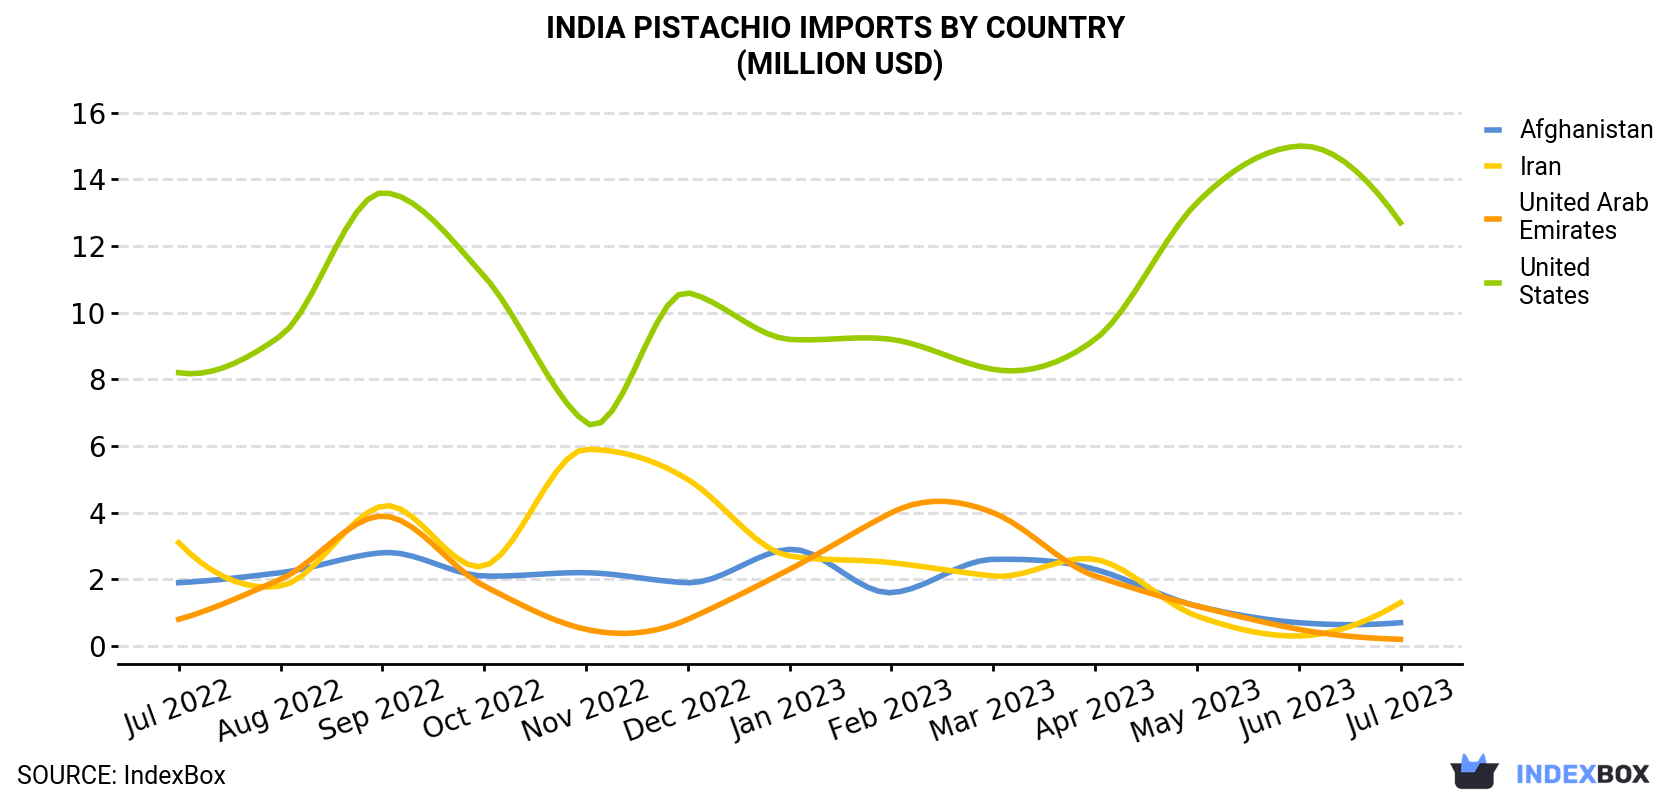 India Pistachio Imports By Country (Million USD)